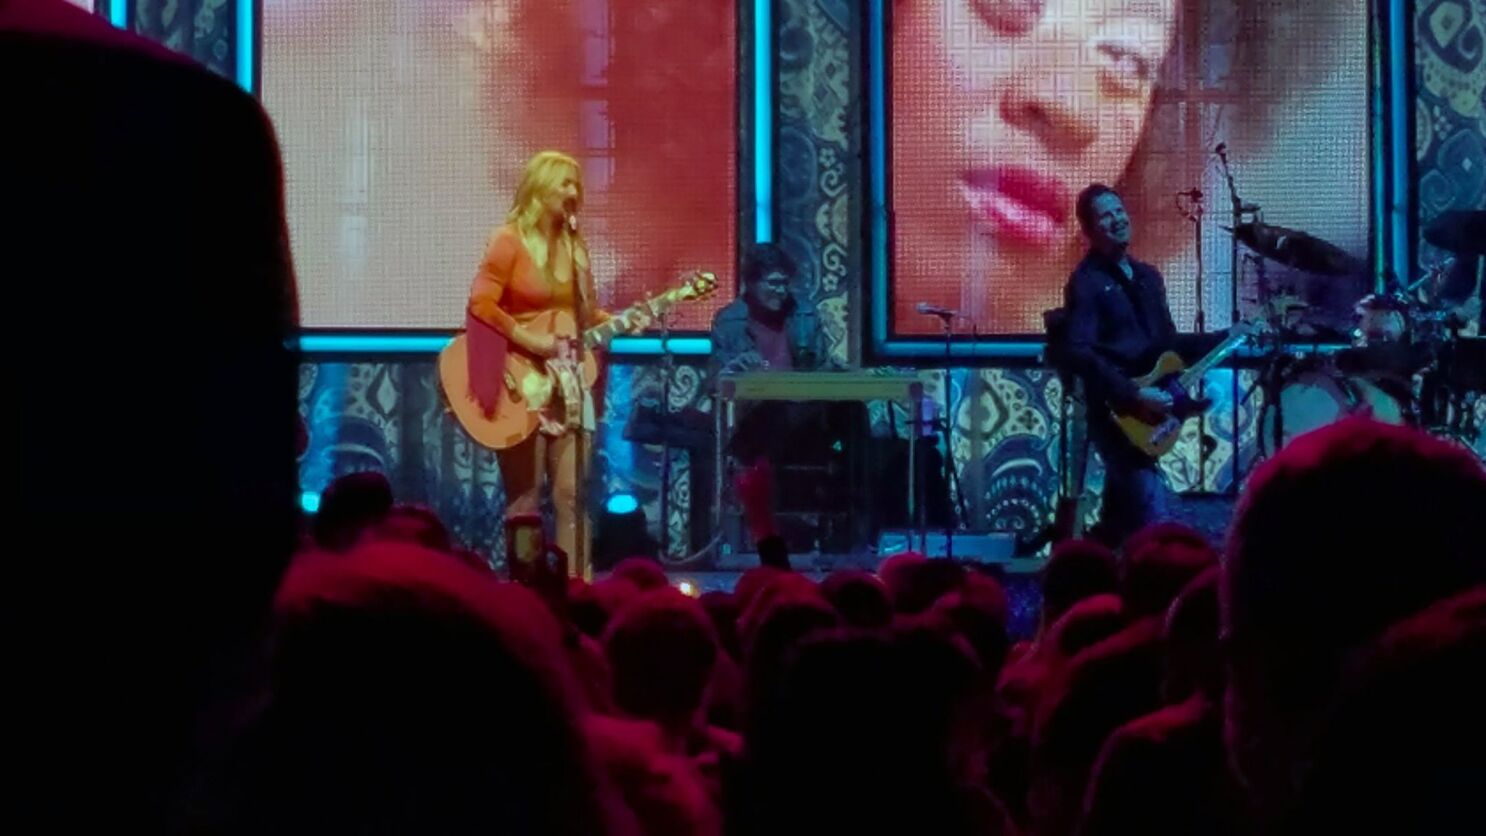 In San Diego Concert Miranda Lambert Takes The Audience On An Emotional Roller Coaster The San Diego Union Tribune Listen to storms never last (live) by miranda lambert, 1,754 shazams. in san diego concert miranda lambert